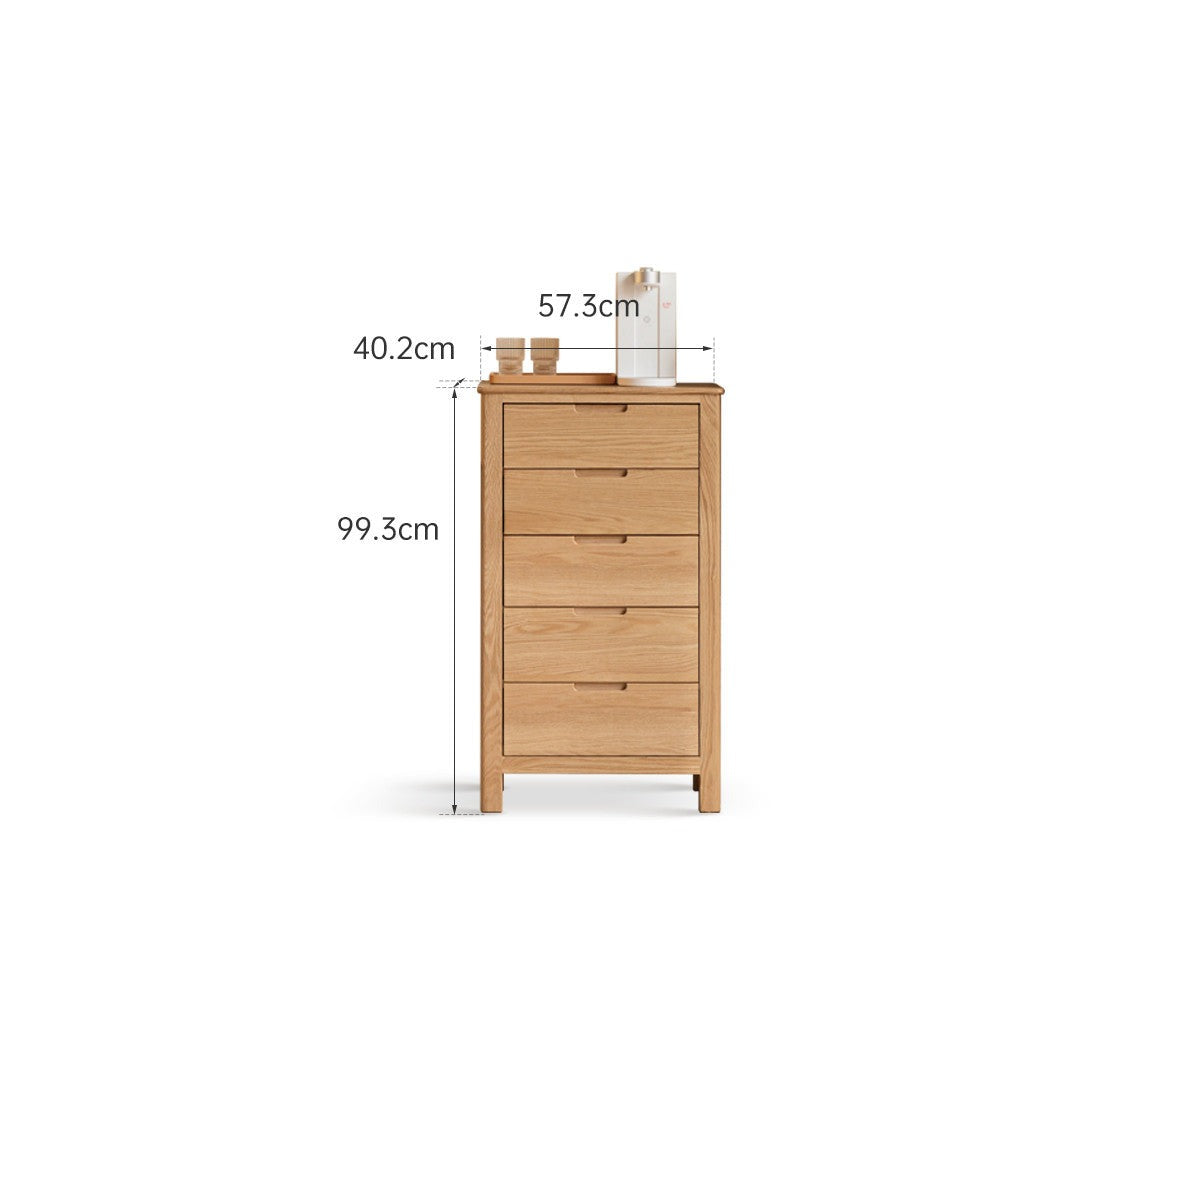 Oak solid wood chest of drawers"